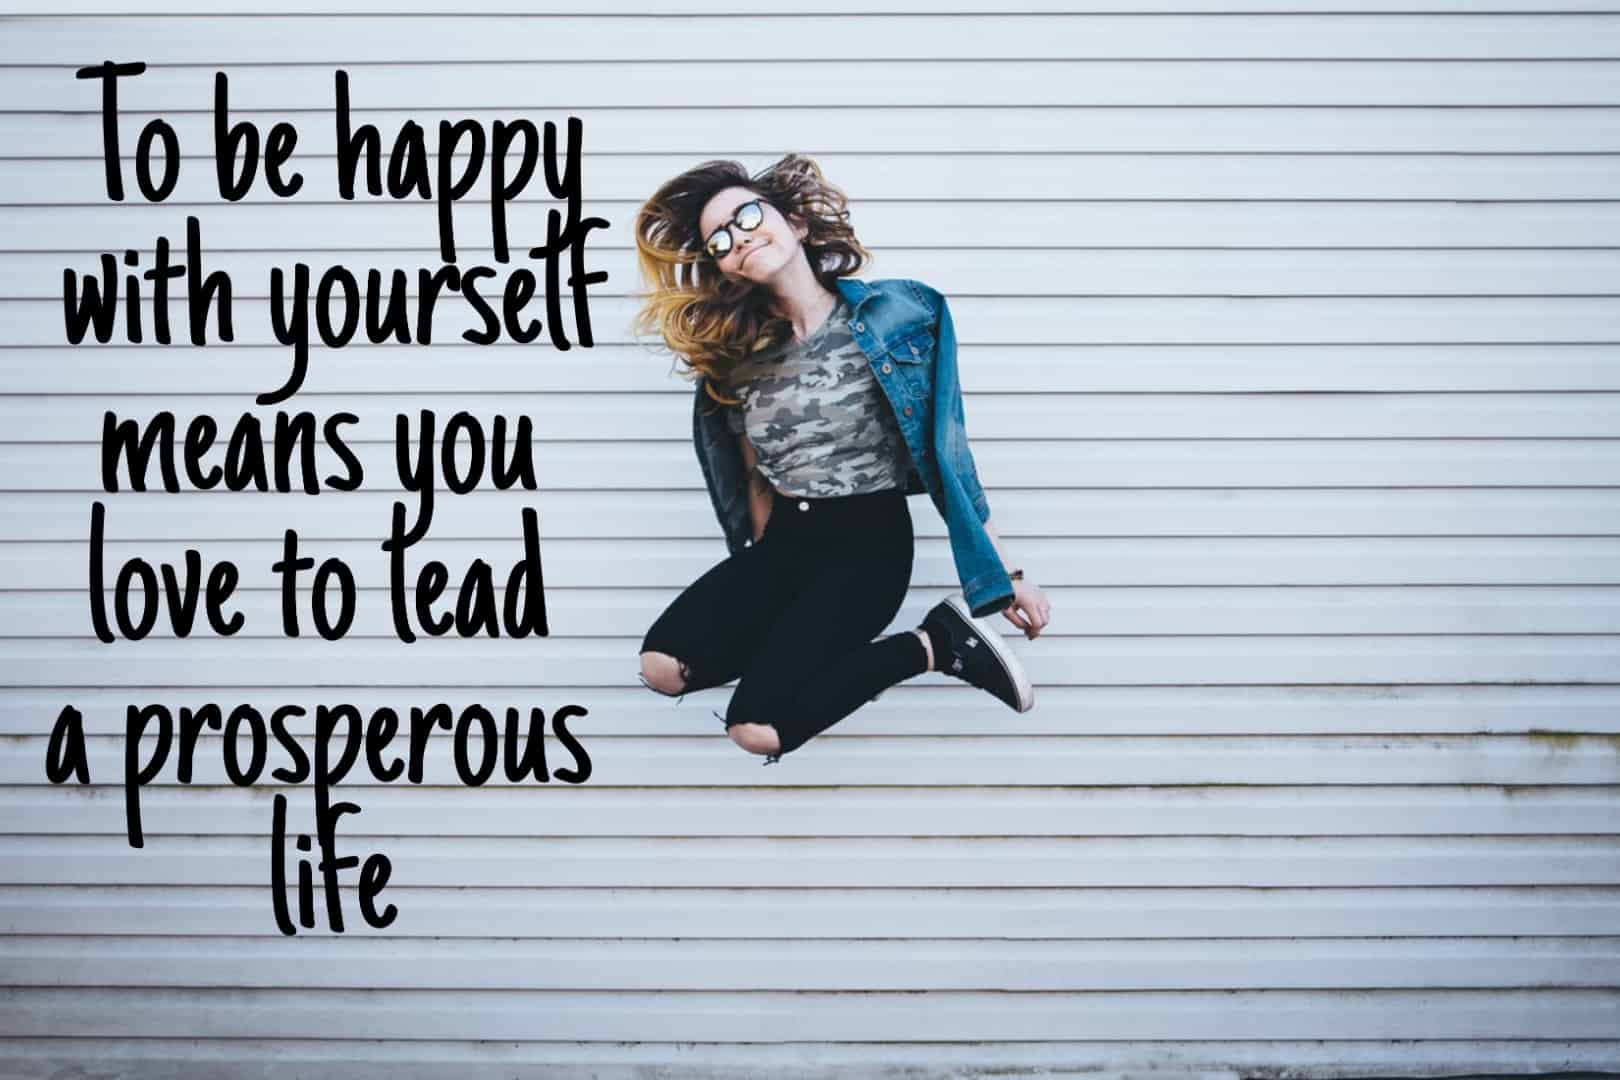 be happy with yourself